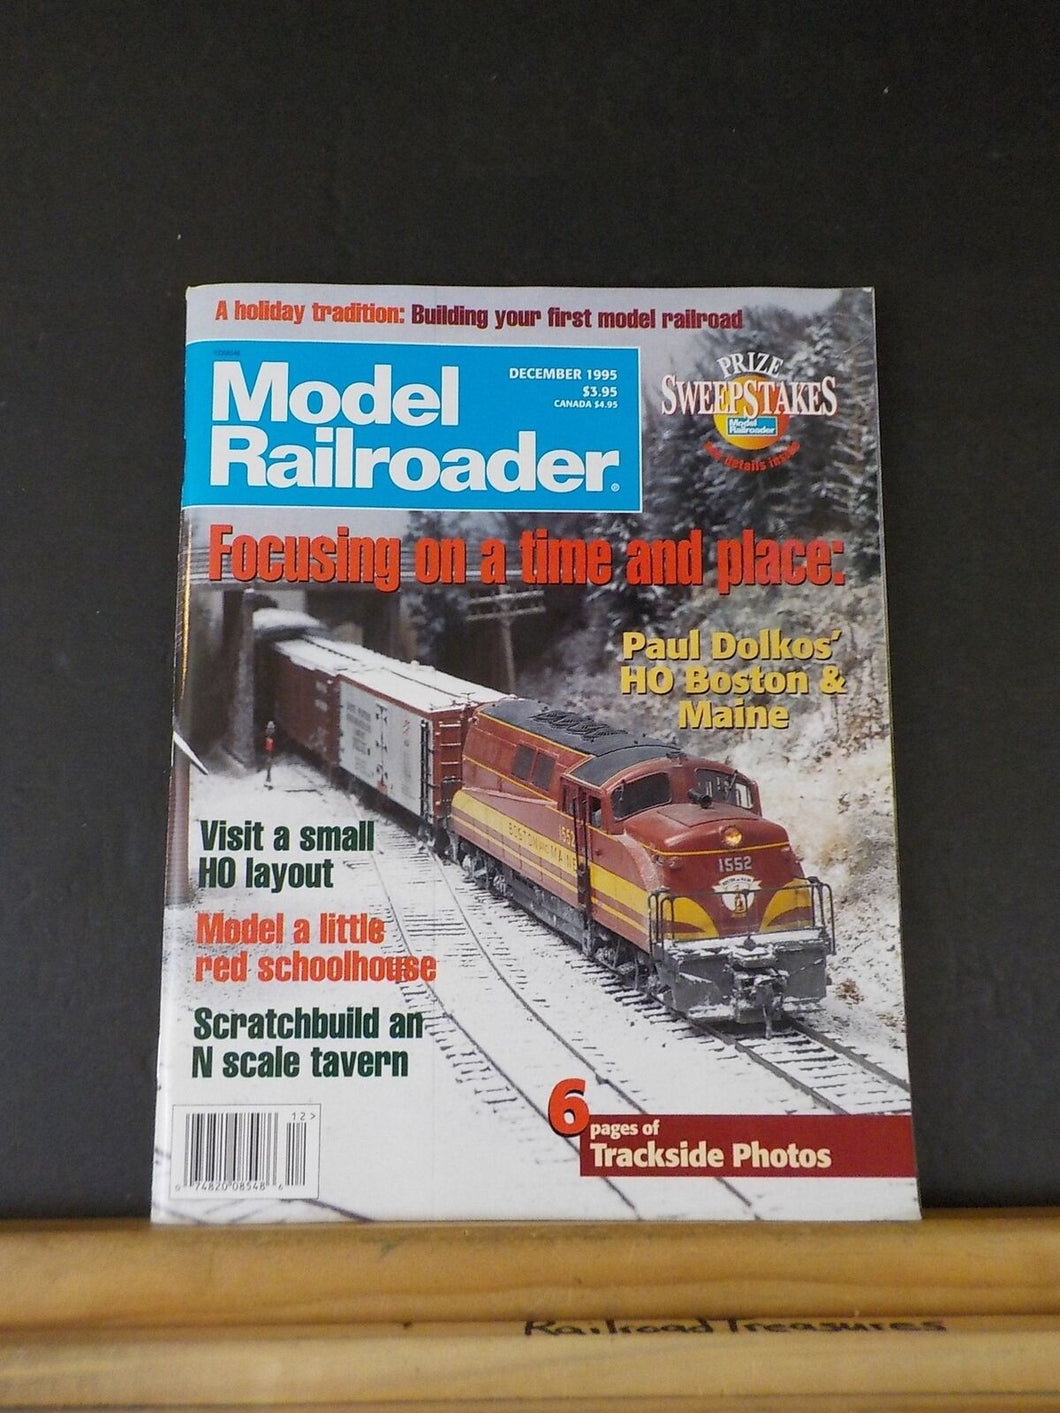 Model Railroader Magazine 1995 December Focusing on a time & place Schoolhouse